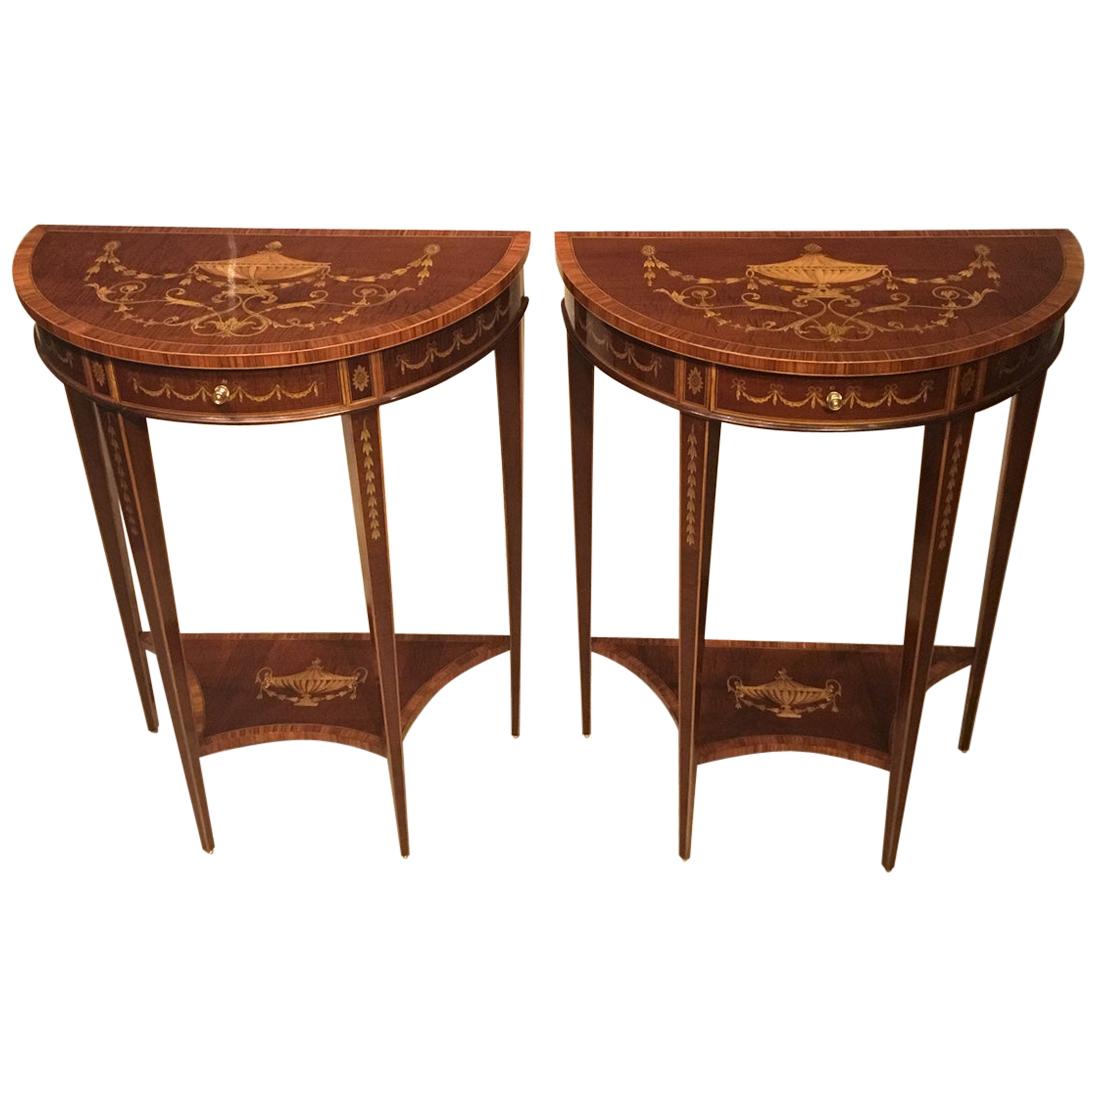 Good Pair of Sheraton Designed Demi Lune Pier Tables For Sale